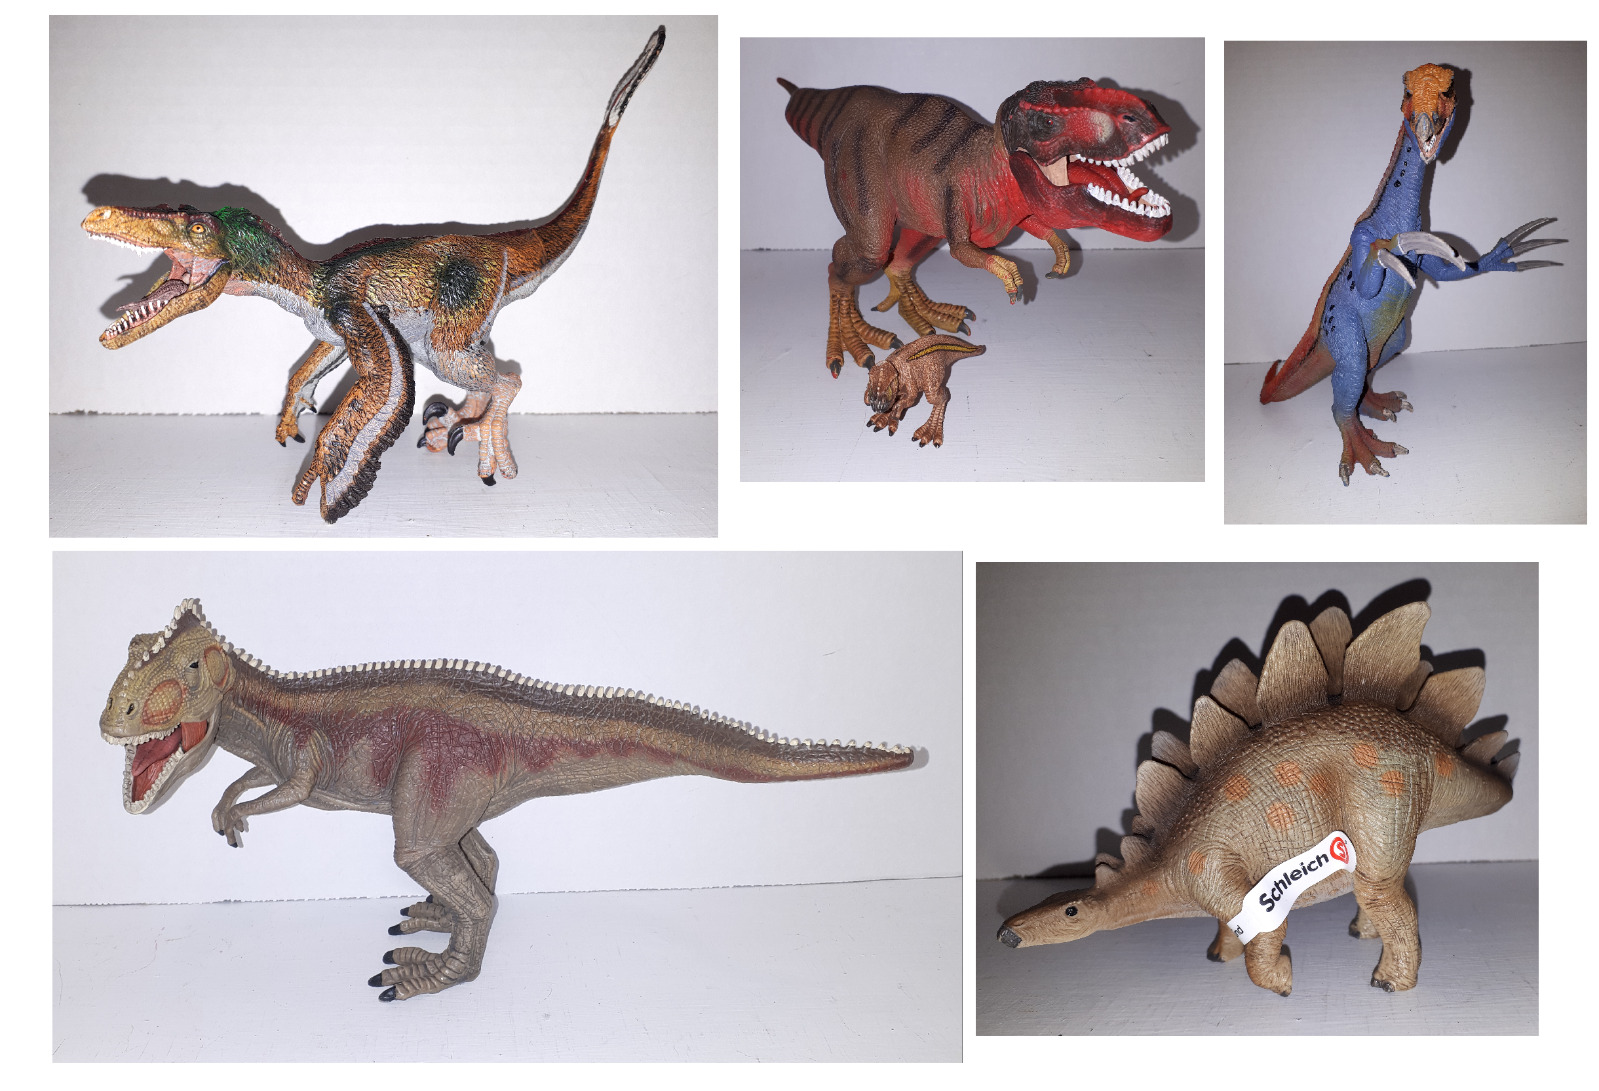 Schleich and Papo Dinosaurs You Choose